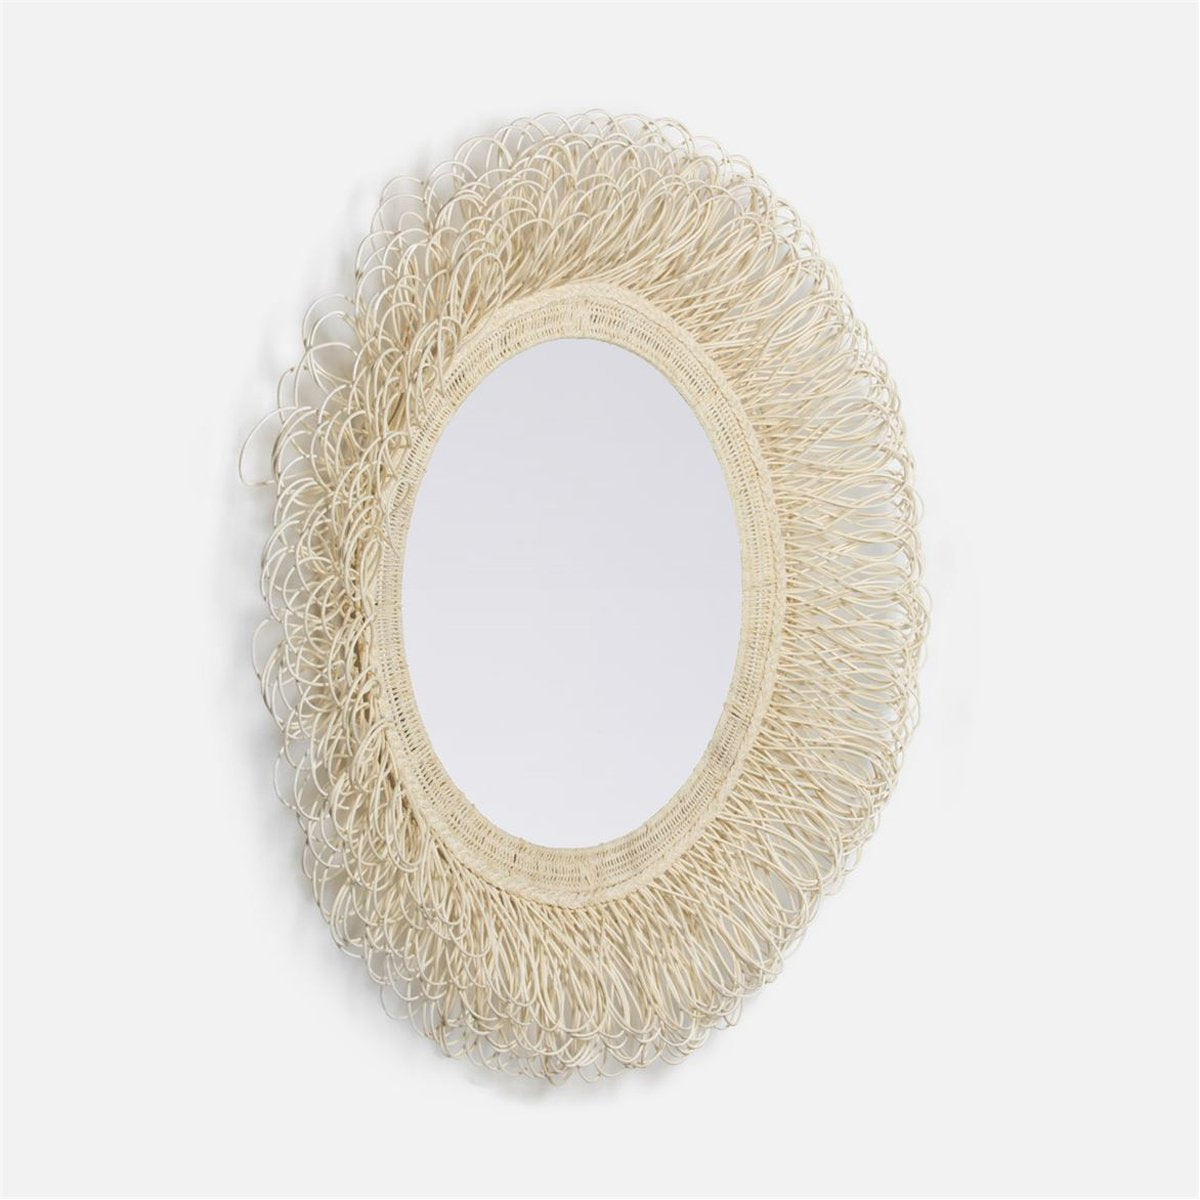 Made Goods Fabian Mirror with Rattan Core